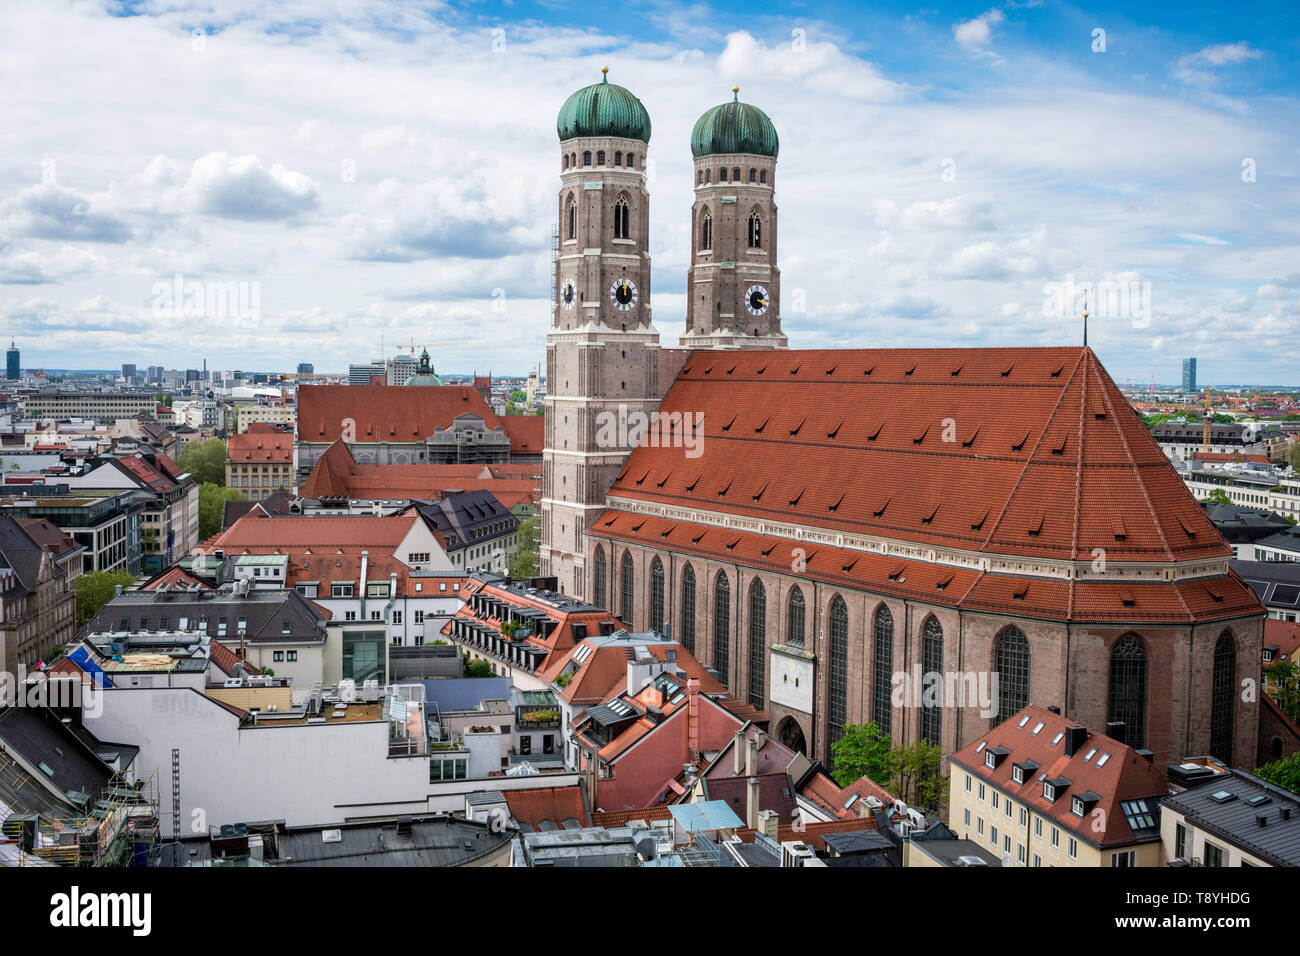 Munich frauenkirche Cathedral, beautiful perspective on one of the icons of this German city Stock Photo